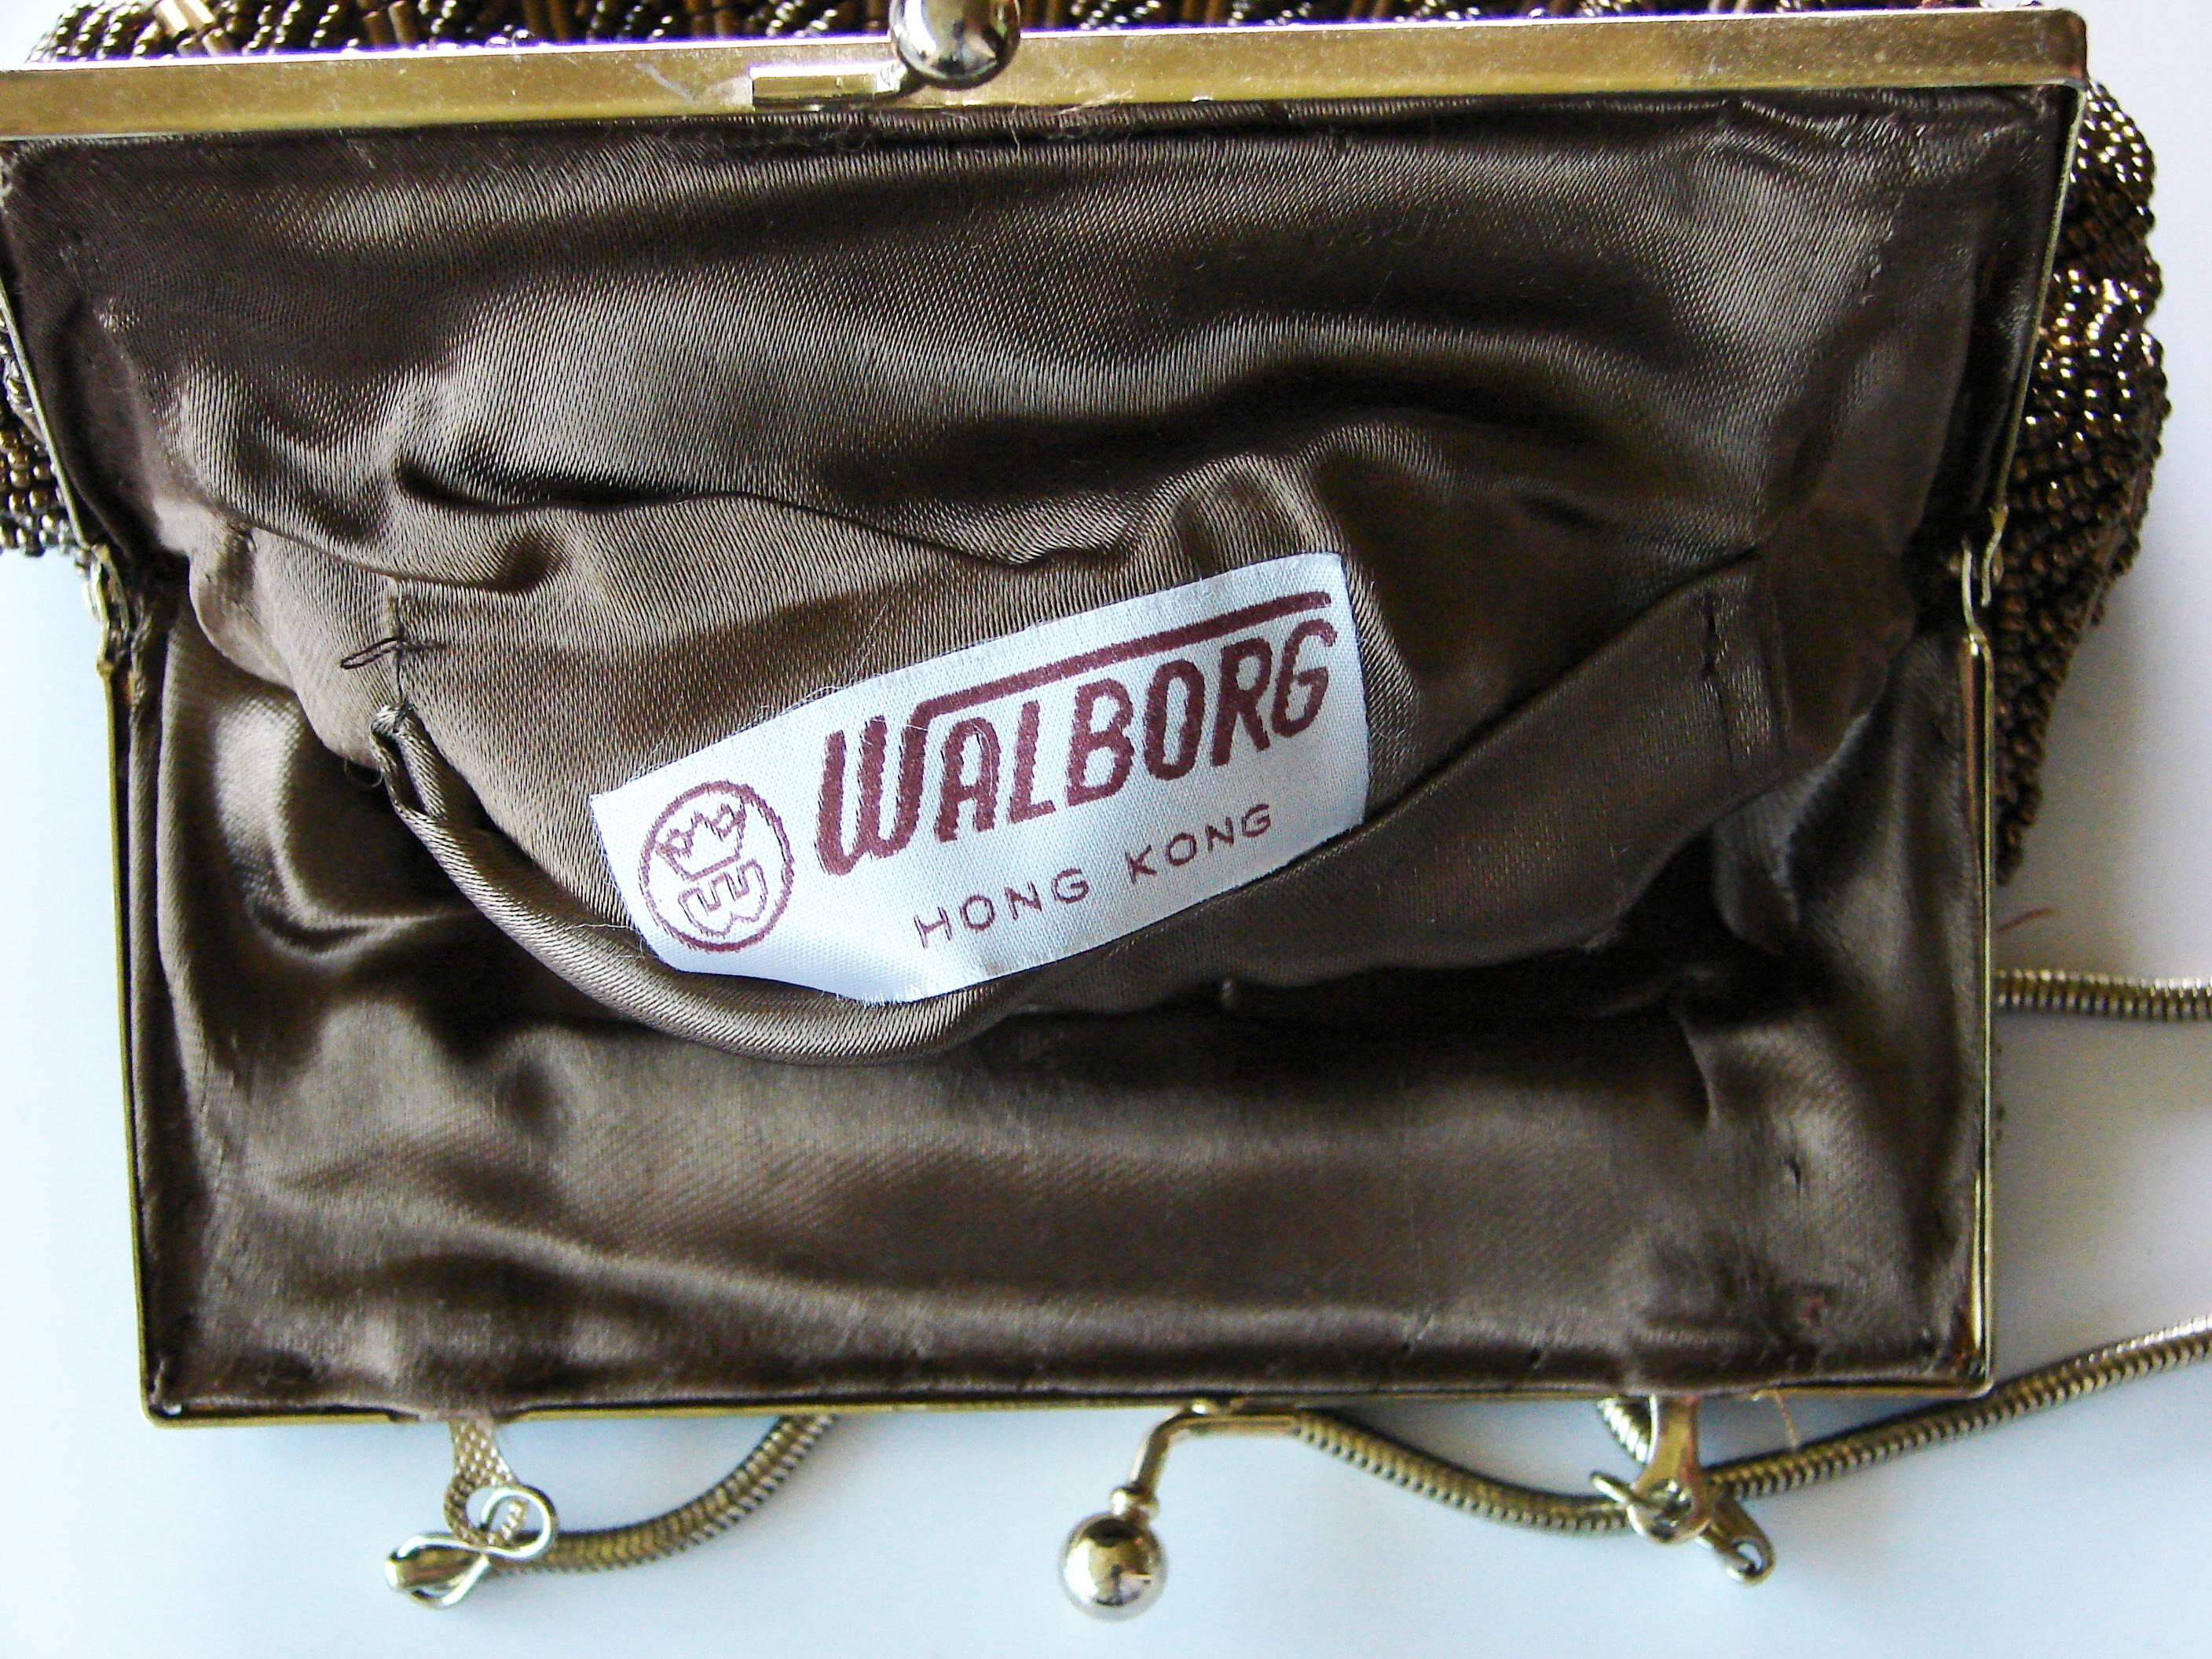 Exquisite Walborg Beaded Kisslock Evening Bag with Silk Satin Lining 1970s  4